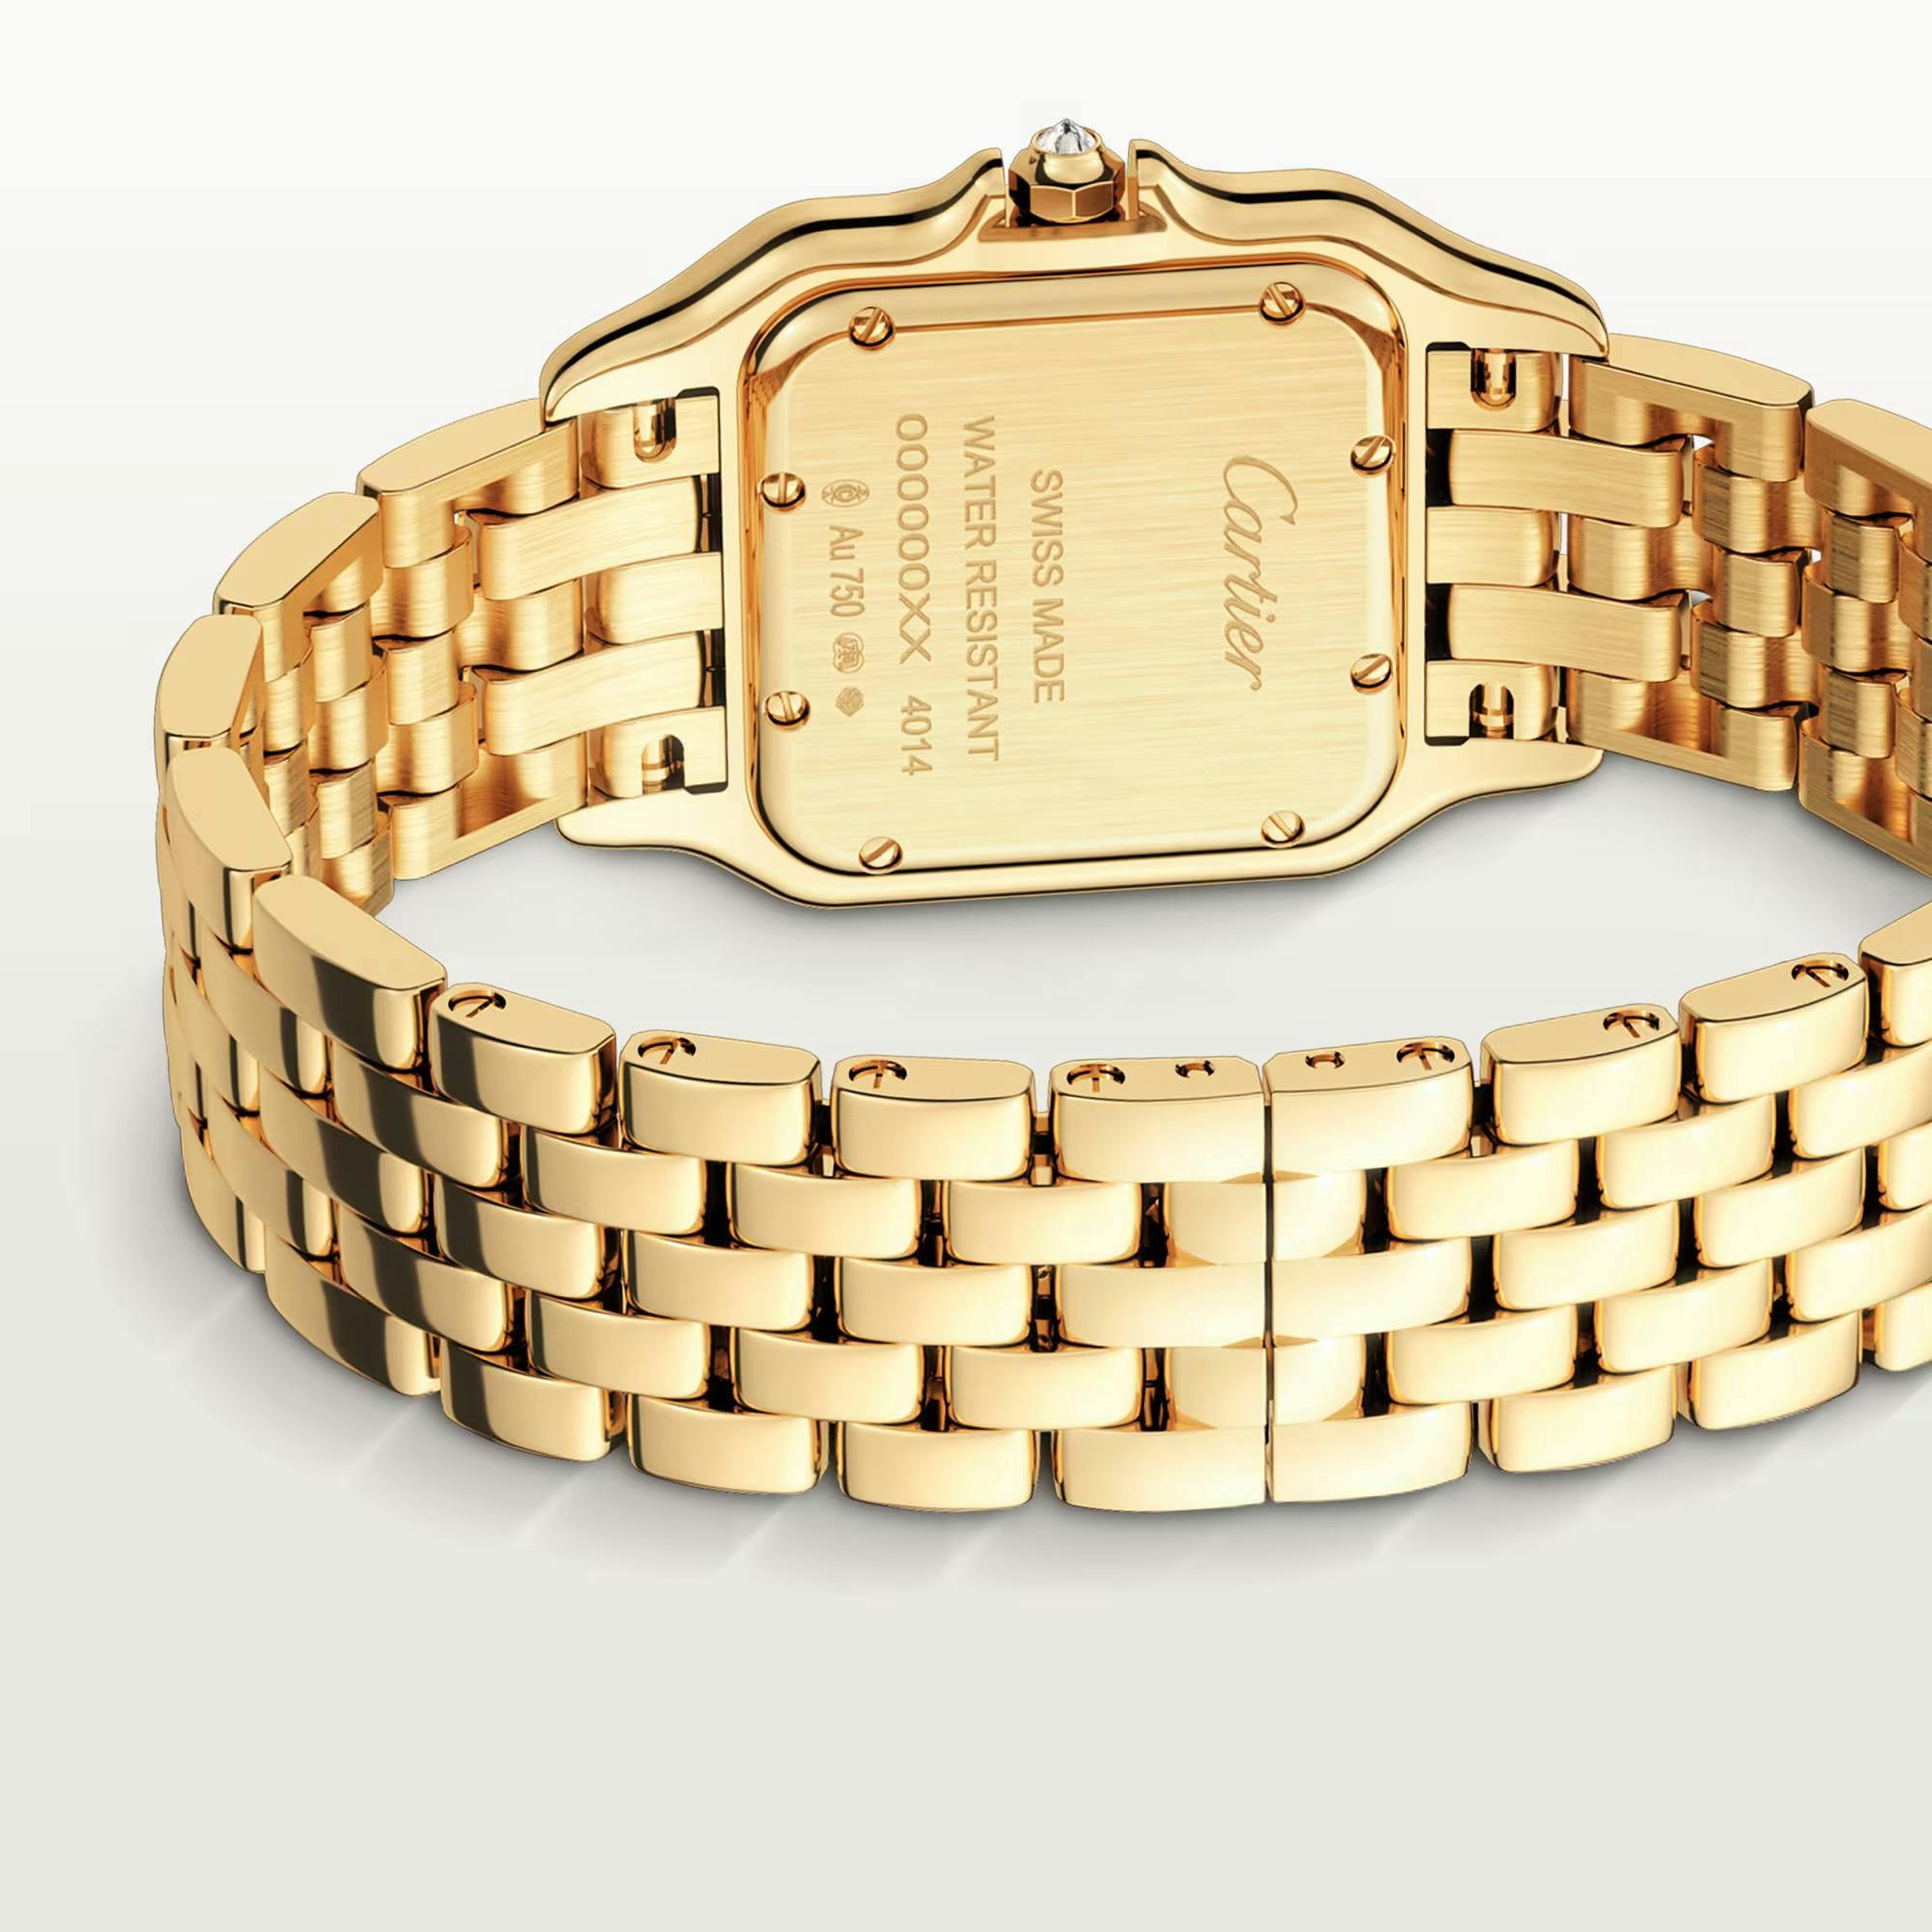 Panthere de Cartier Watch in Yellow Gold with Diamonds, medium model 5